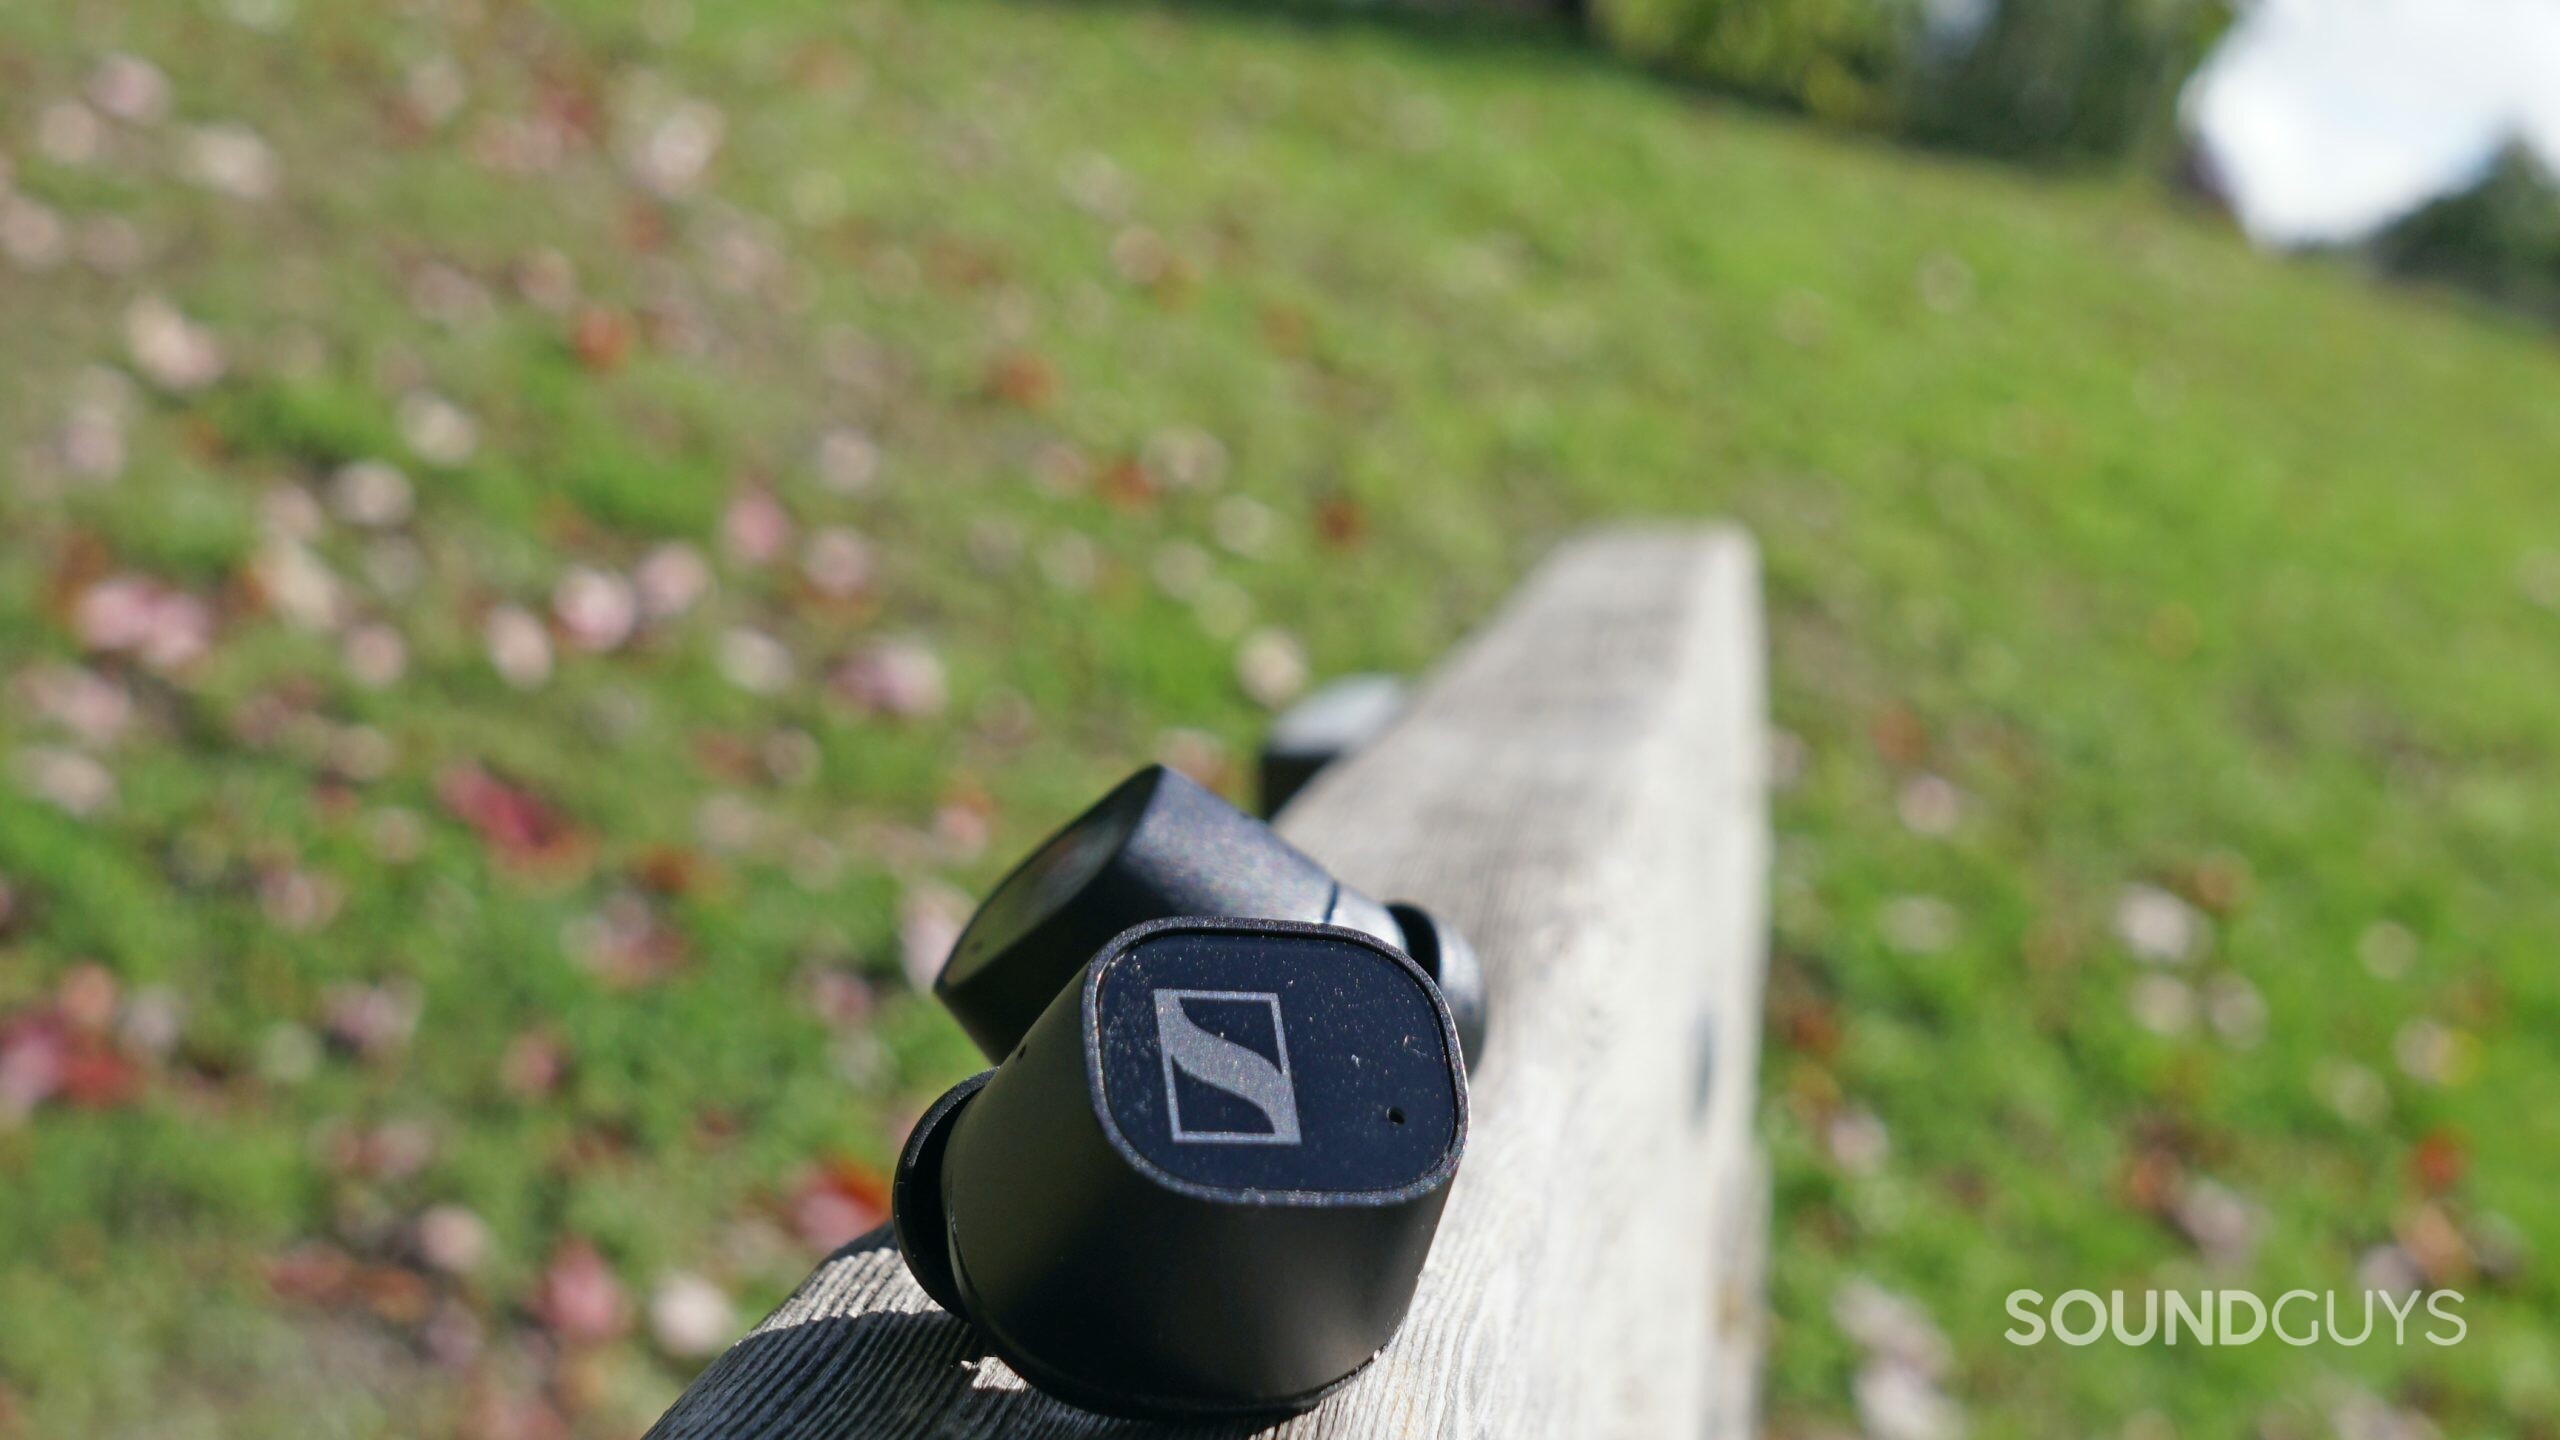 The Sennheiser CX Plus True Wireless earbuds lay on a wooden bench outside.